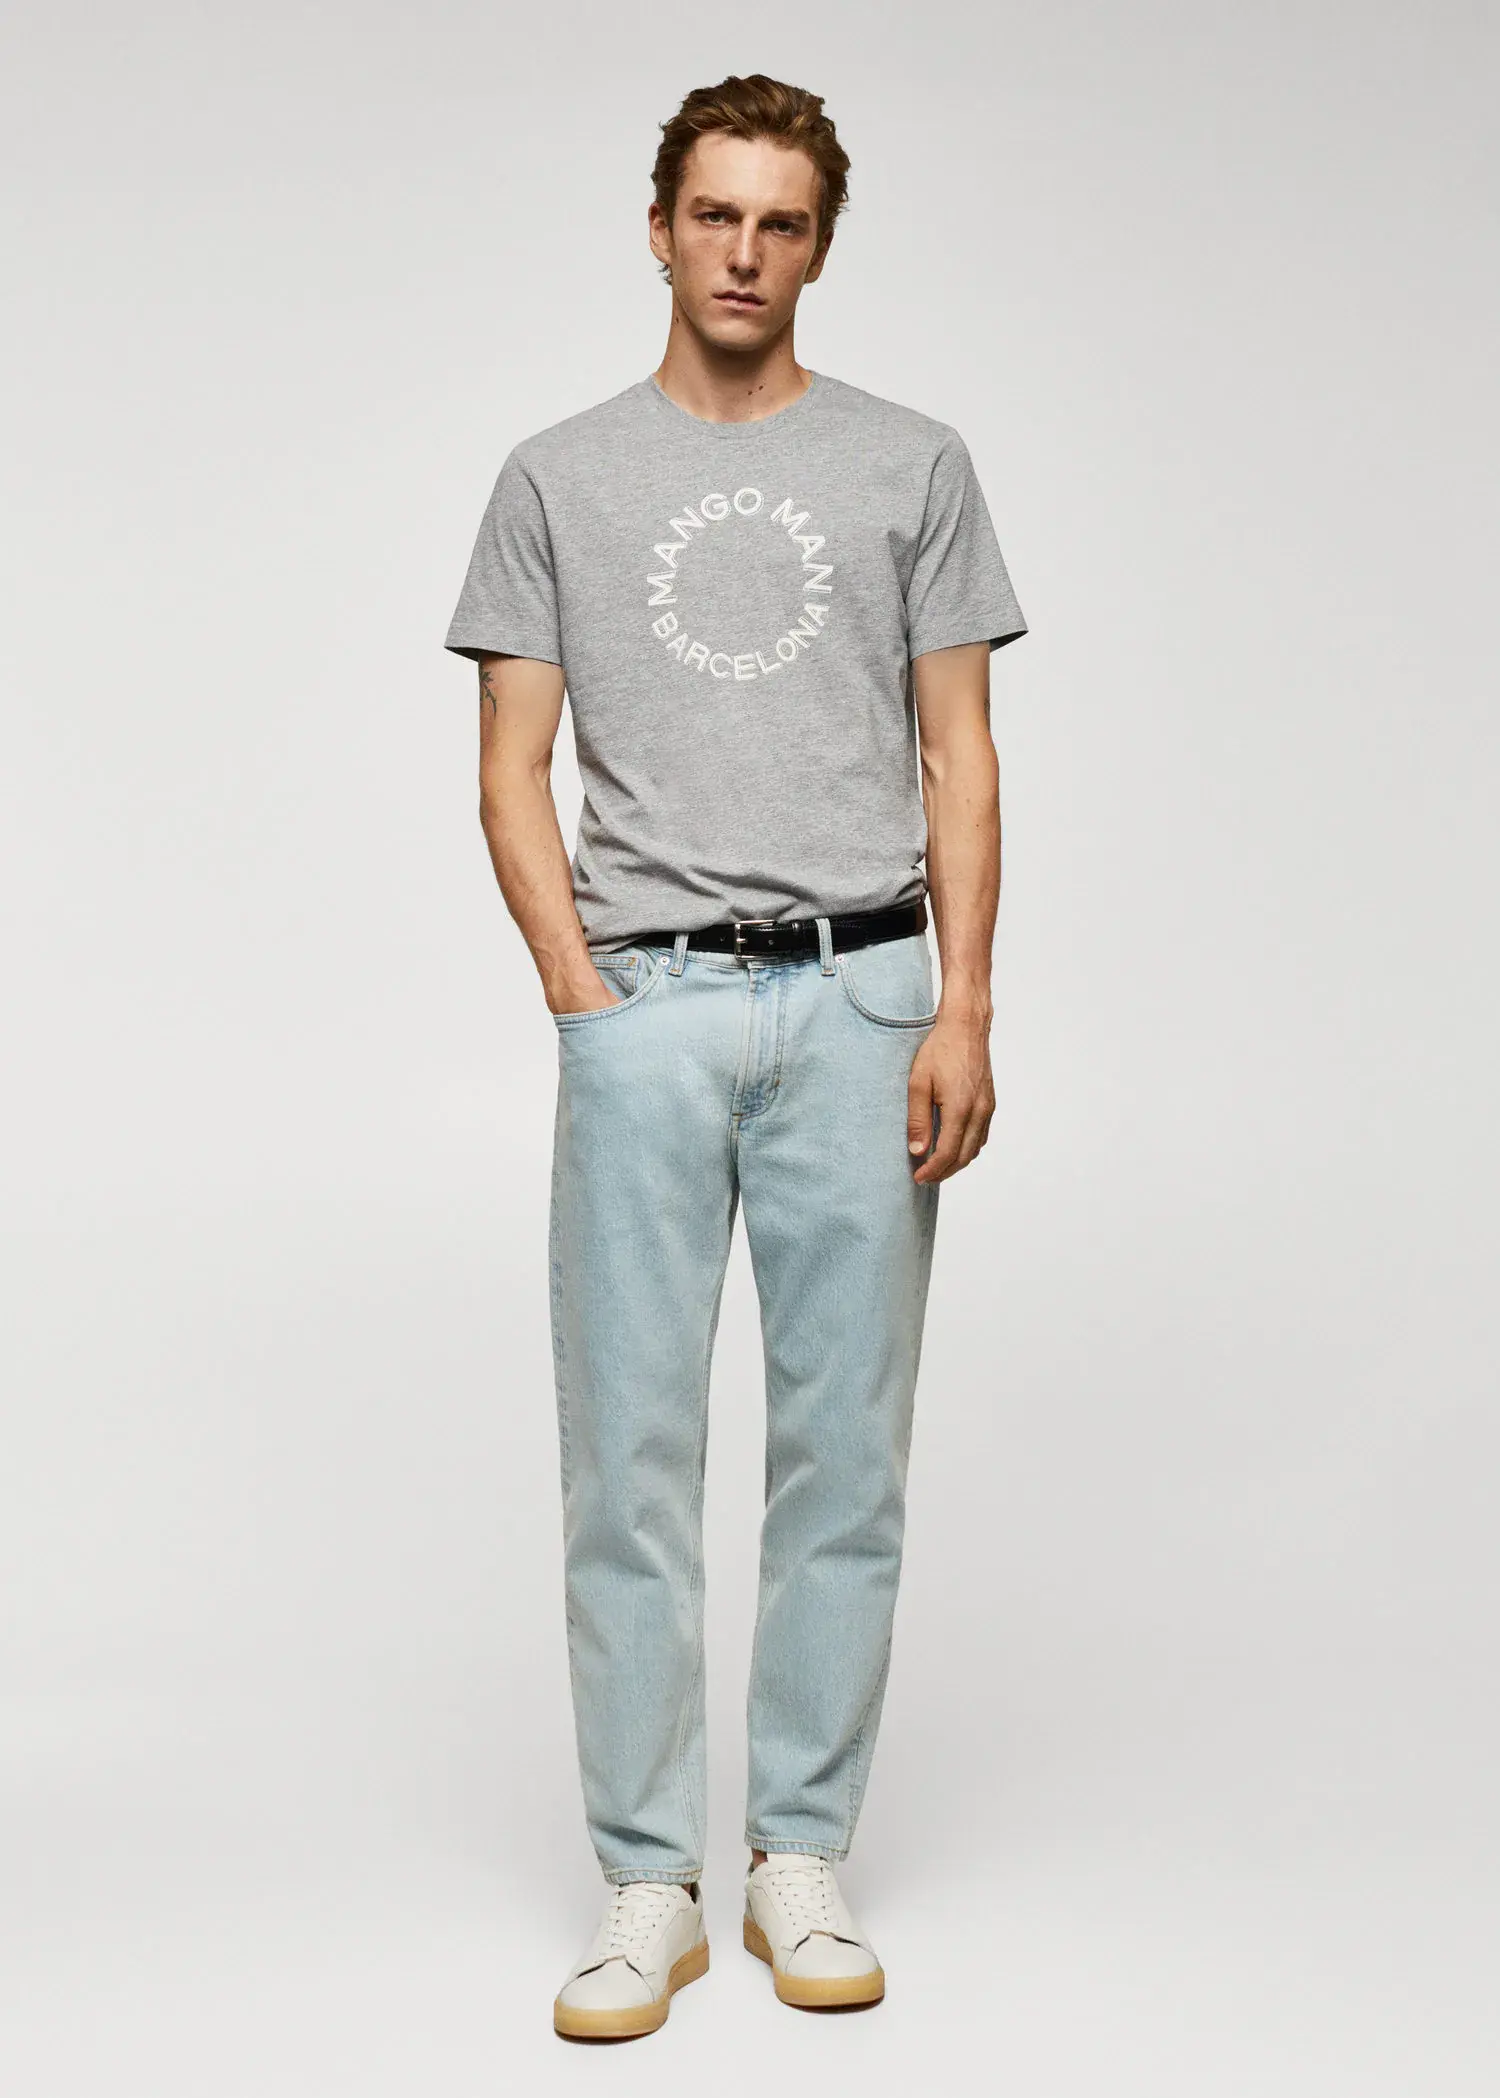 Mango 100% cotton t-shirt with logo. a man in a gray t-shirt and light blue pants. 